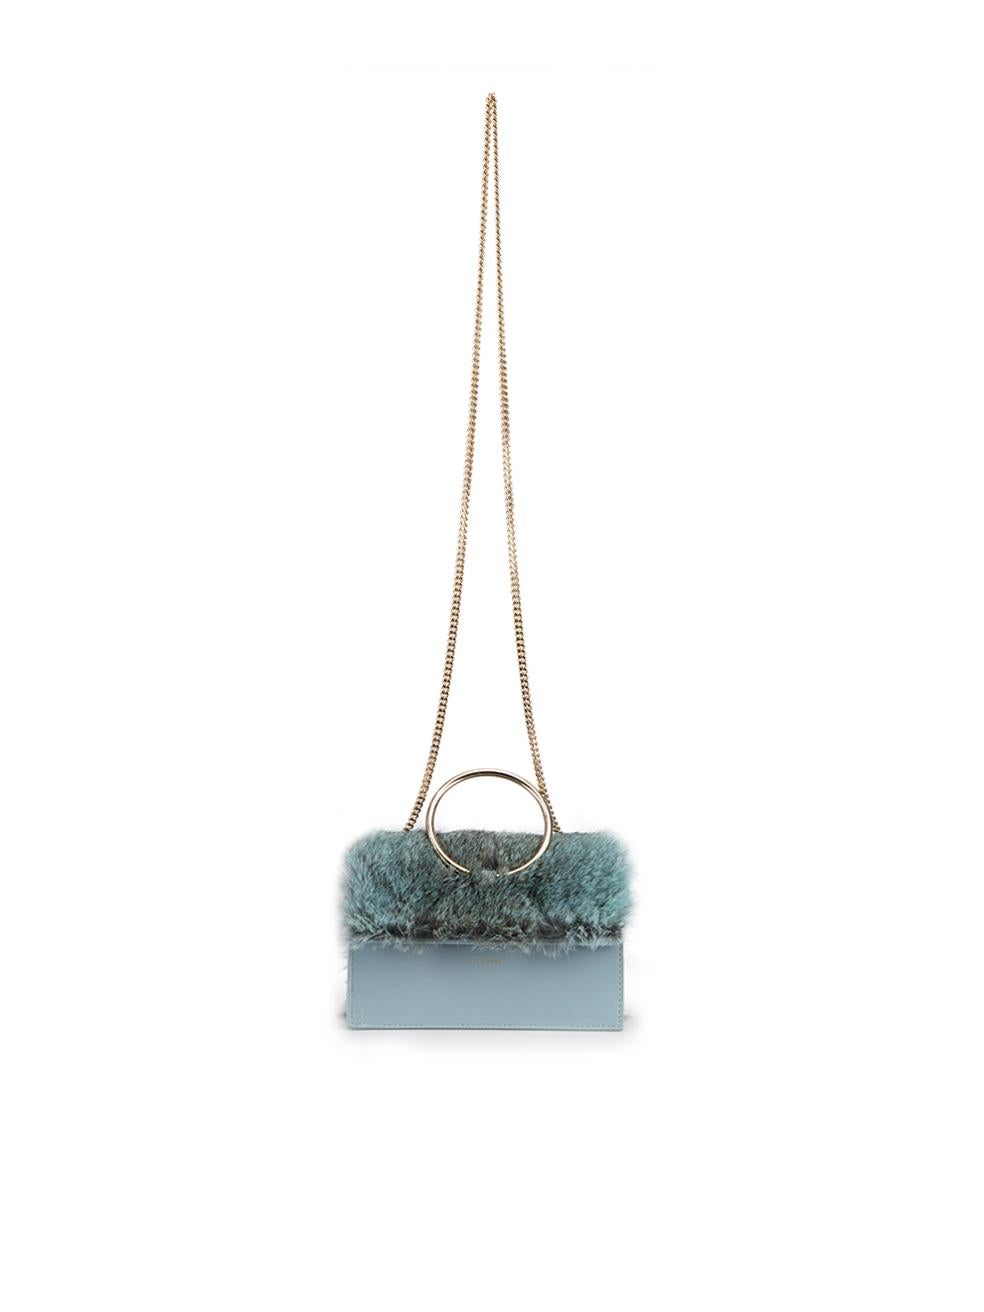 Elie Saab Women's Blue Fur Mini Bag In Good Condition For Sale In London, GB